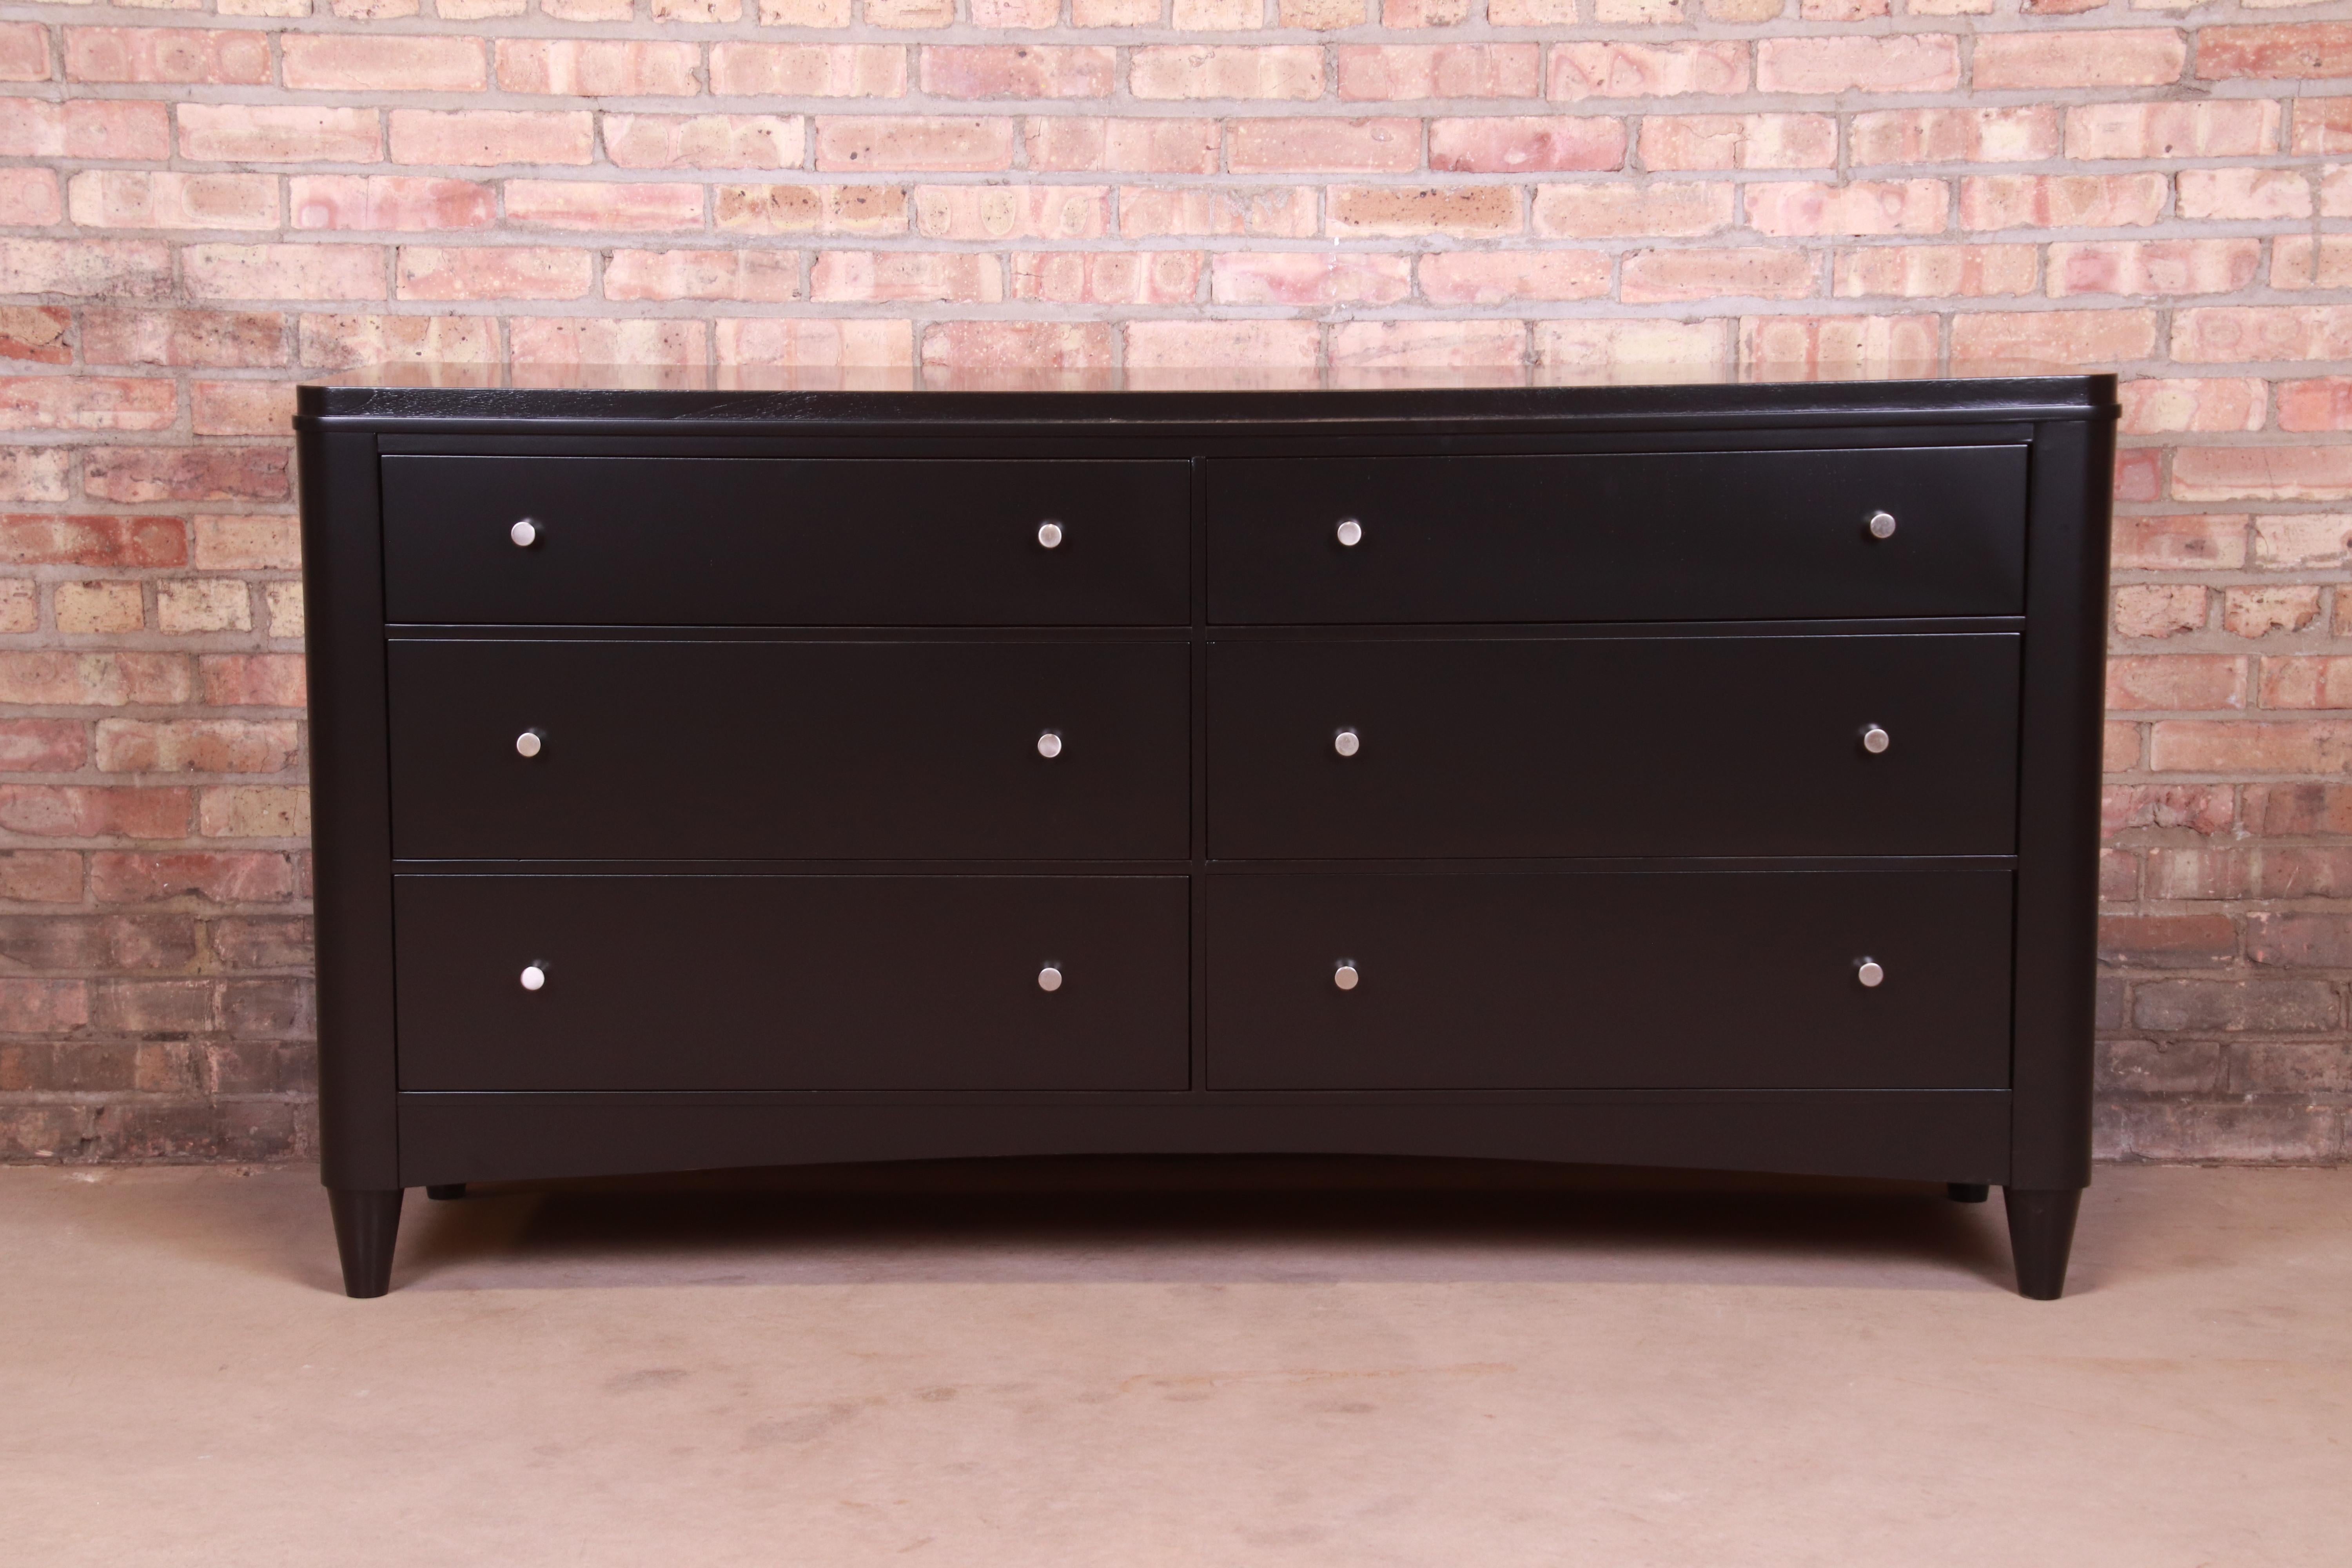 American Ethan Allen Modern Black Lacquered Six-Drawer Dresser or Credenza, Refinished